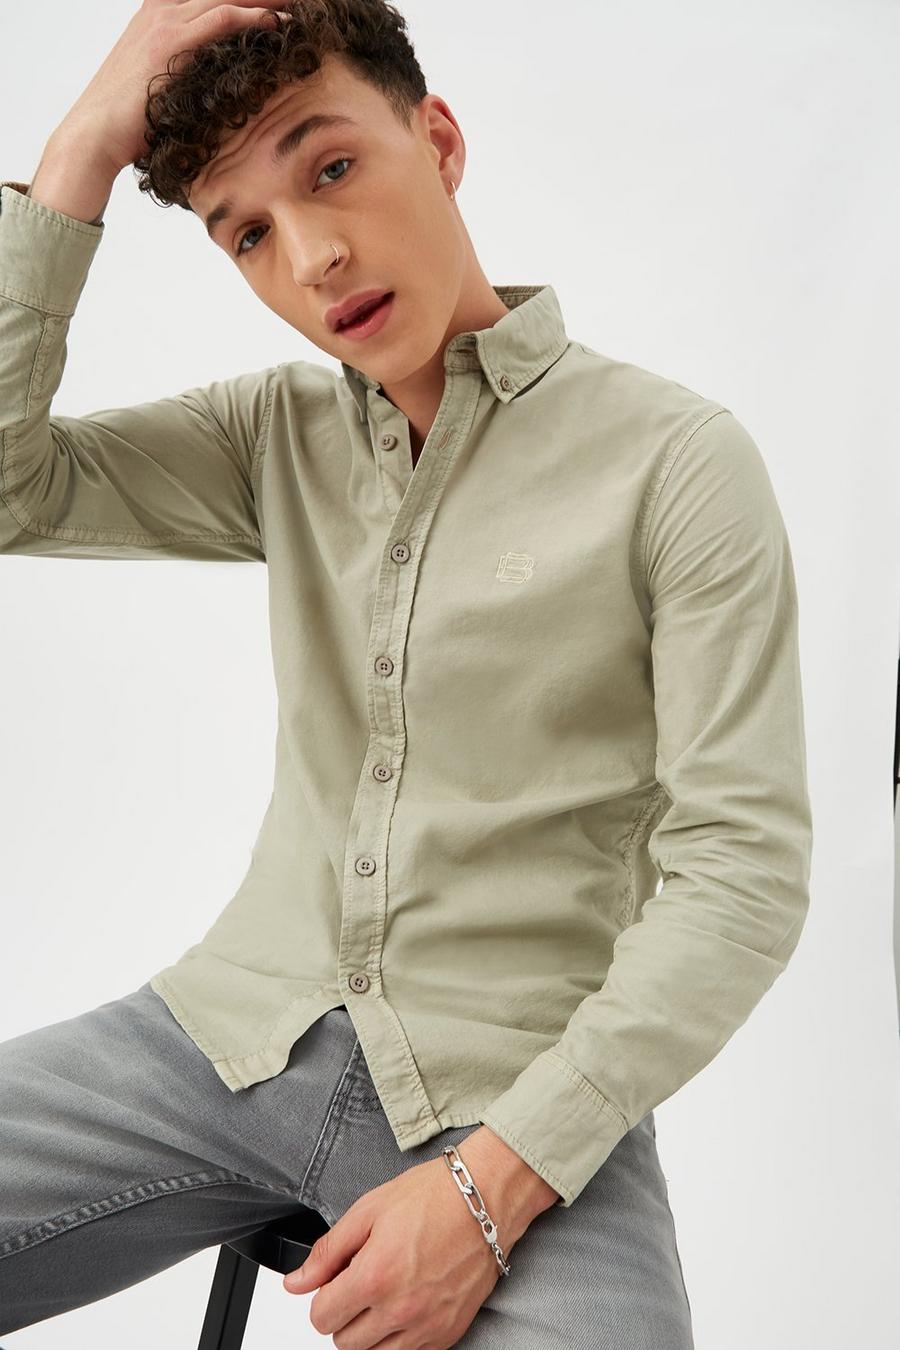 Long Sleeve Muscle Fit Garment Dyed Oxford